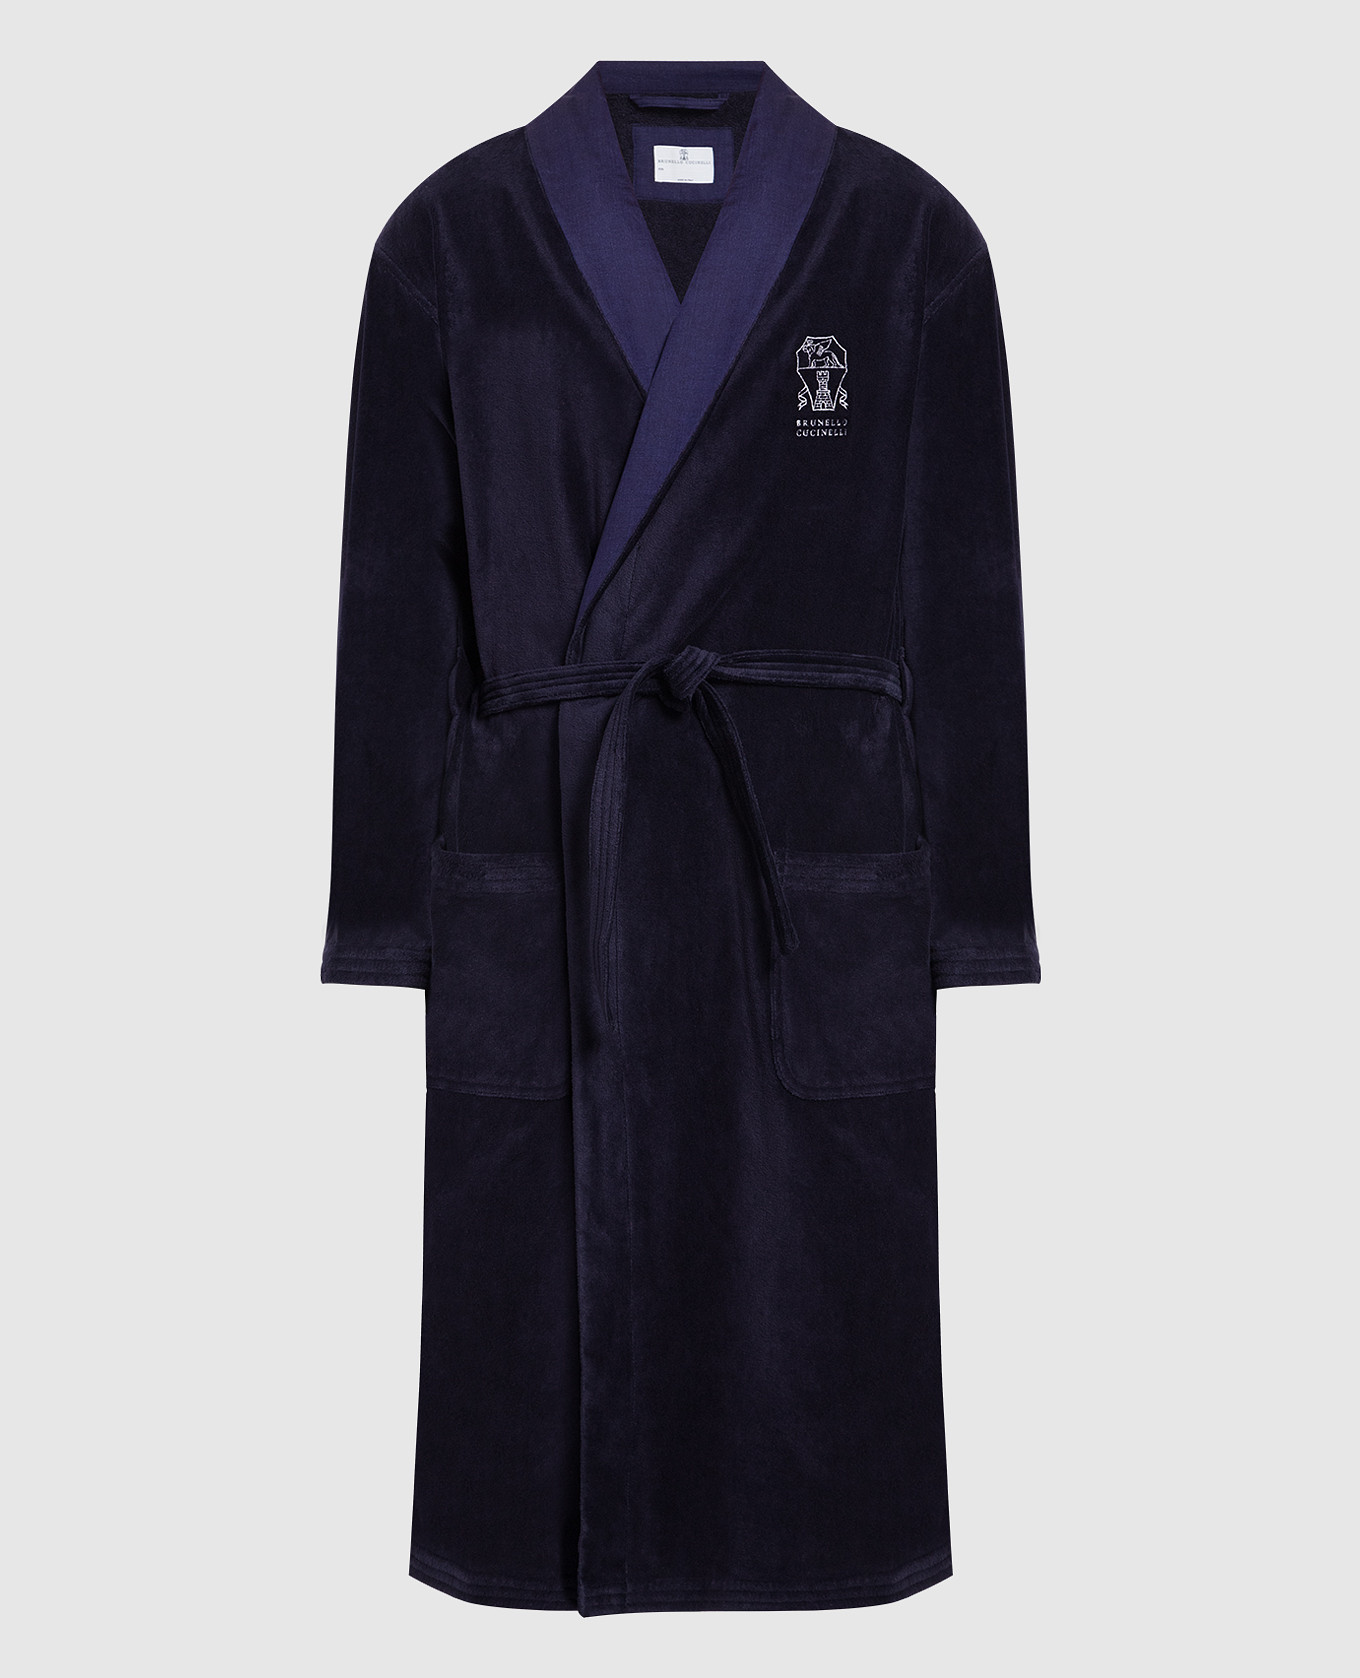 Purple robe with logo embroidery